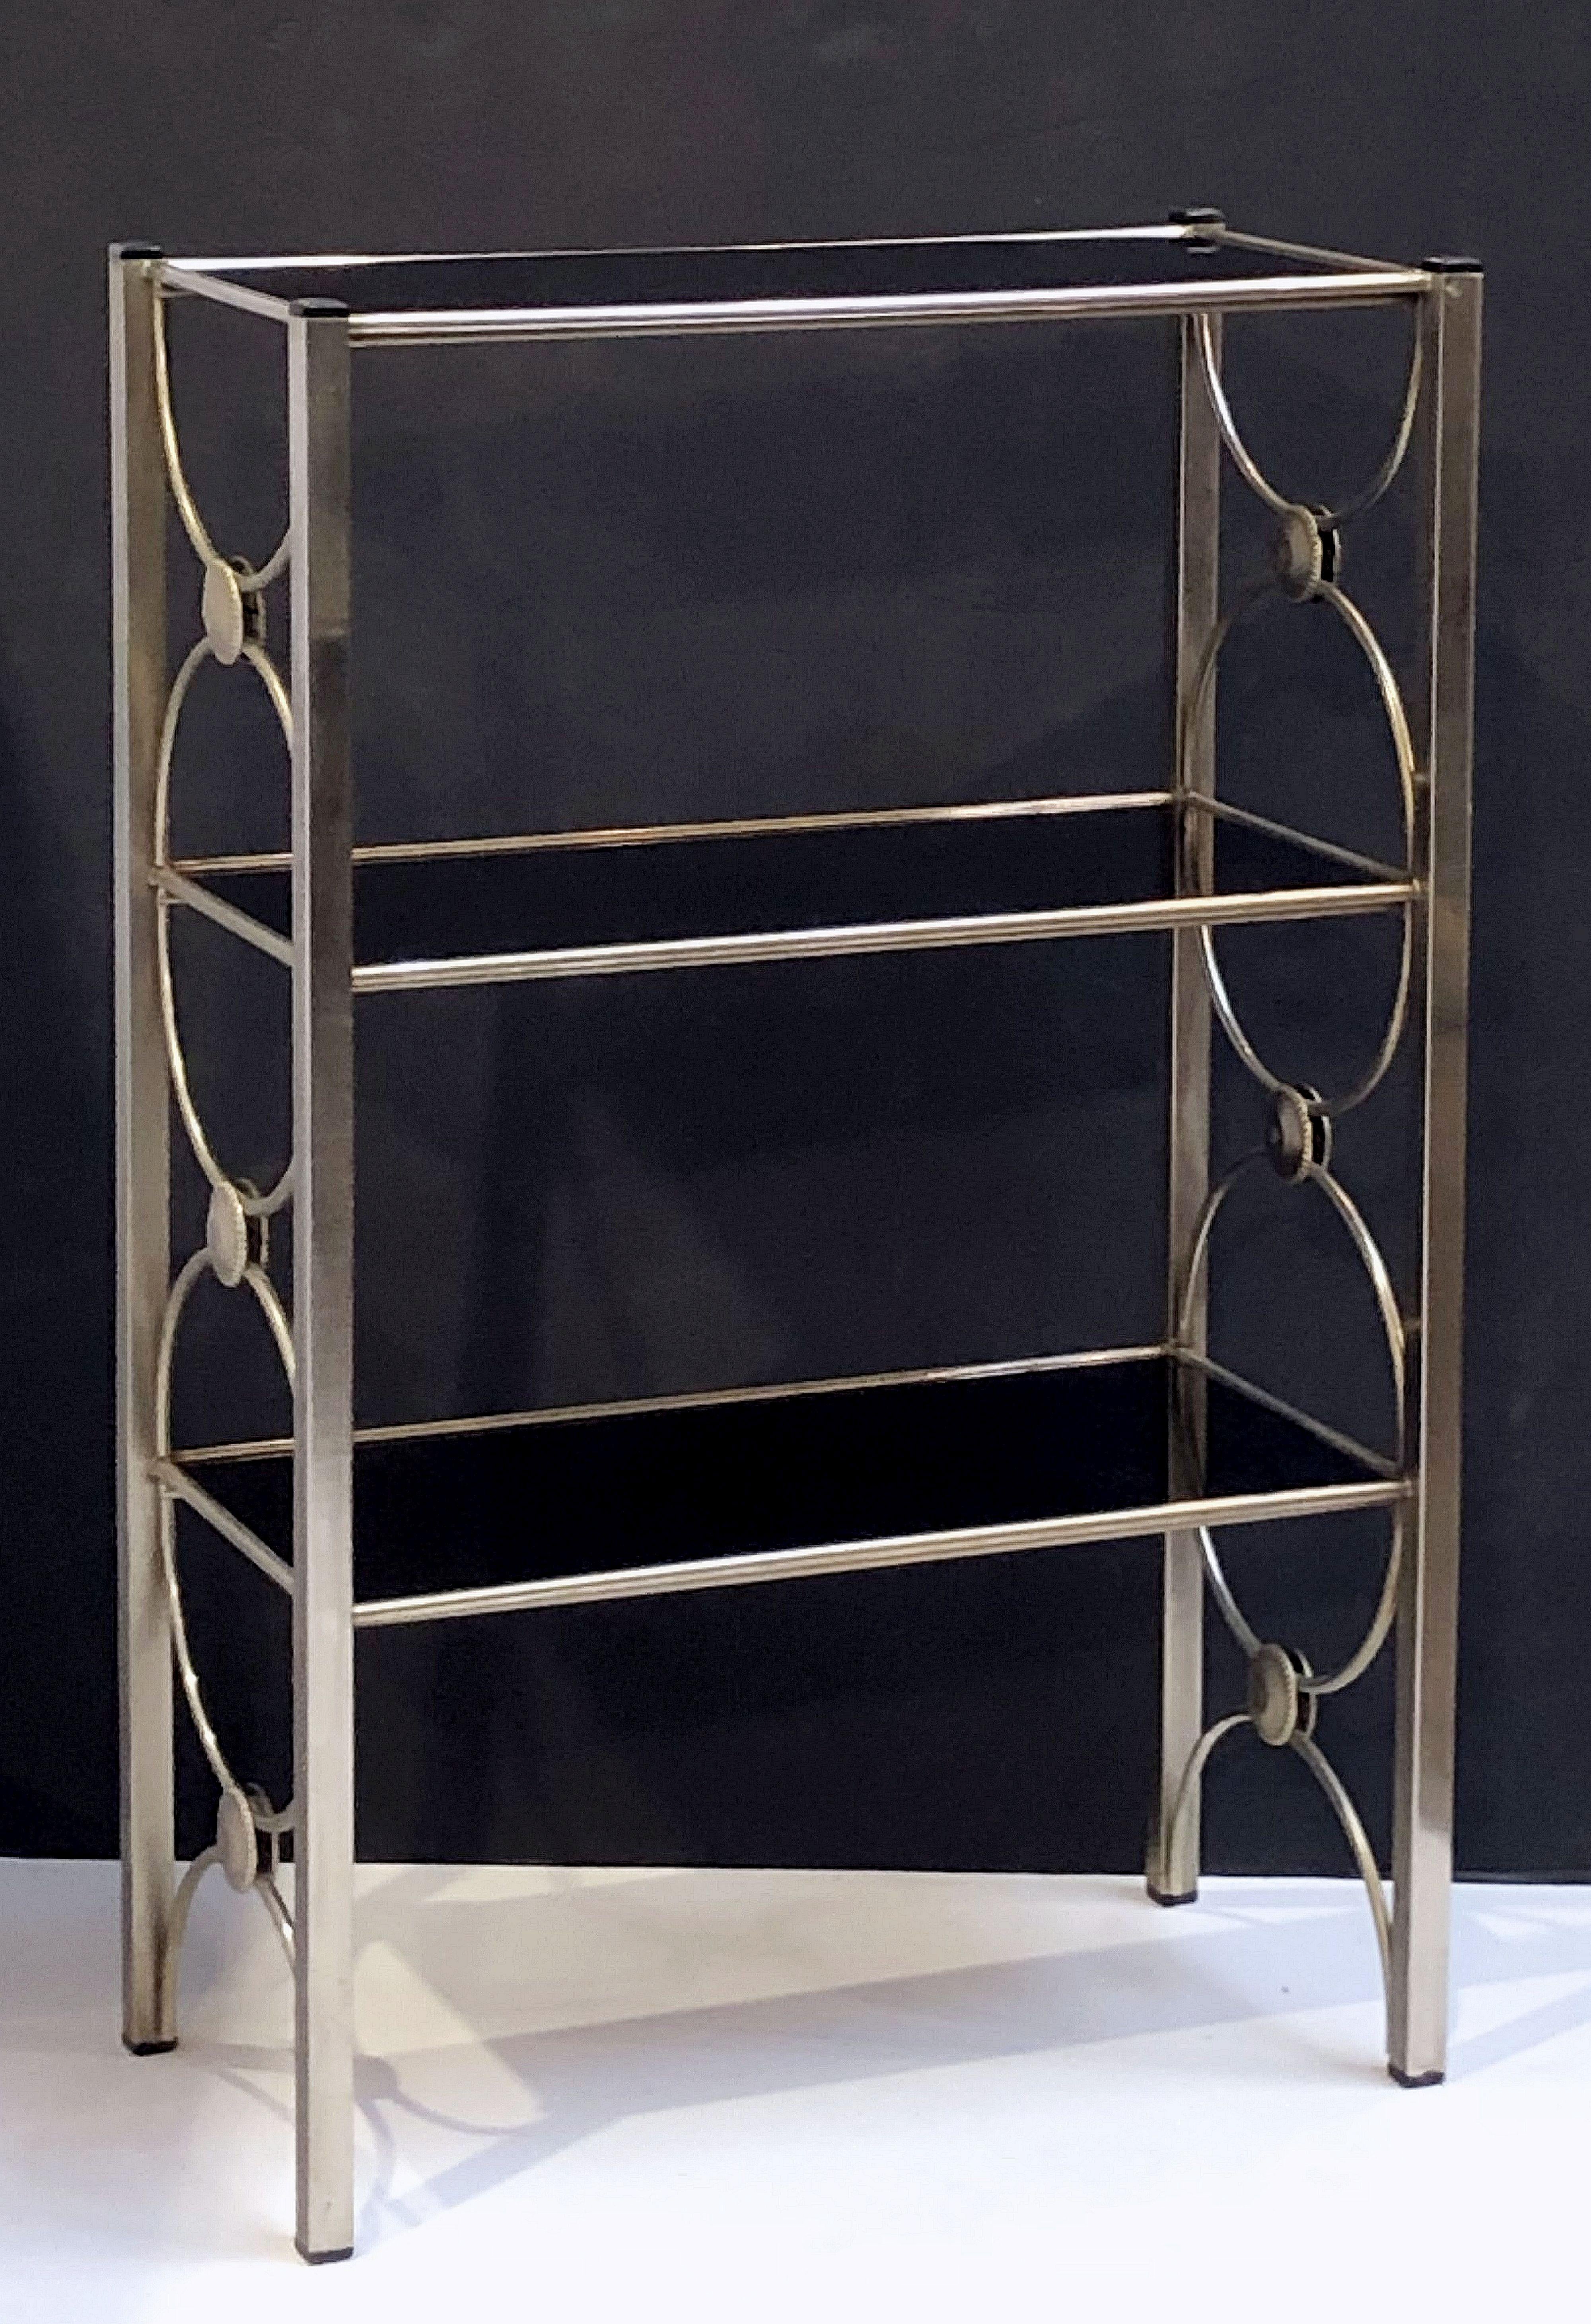 A fine English open etagere or display shelf, featuring a brushed metal frame and three removable rectangular shelves of black glass. Glass shelves can be reversed for a different look.

Dimensions: H 36 inches x W 23 1/2 inches x D 12 inches